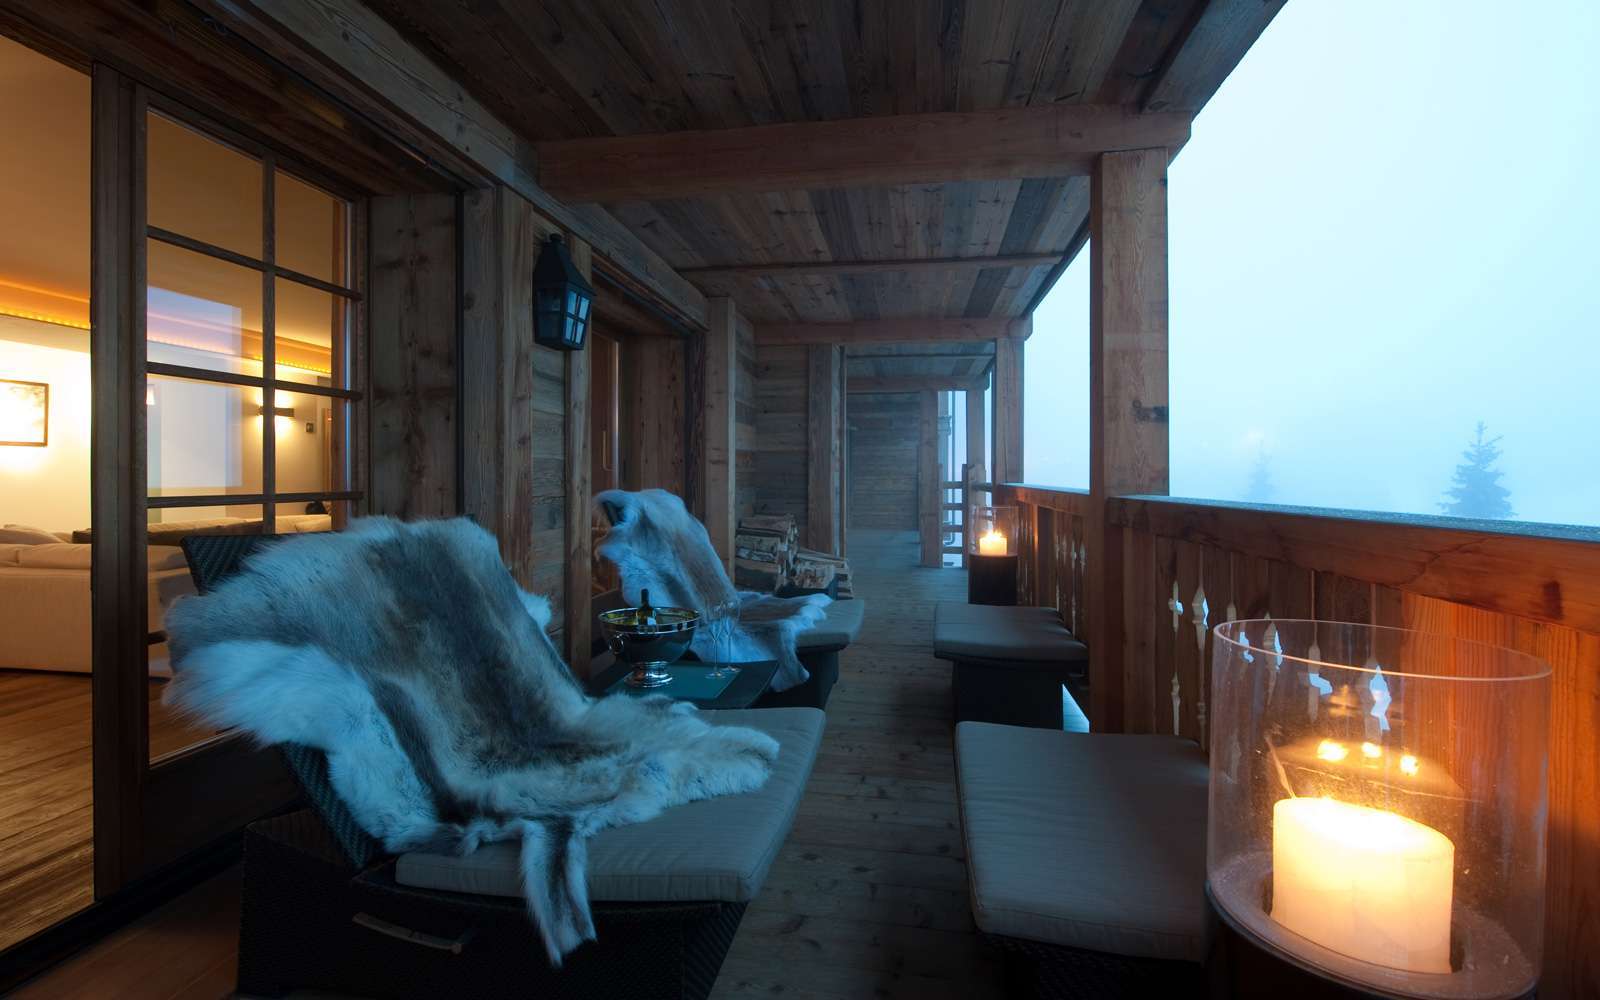 Kings-avenue-verbier-snow-chalet-hifi-childfriendly-fireplace-ski-in-ski-out-056-1